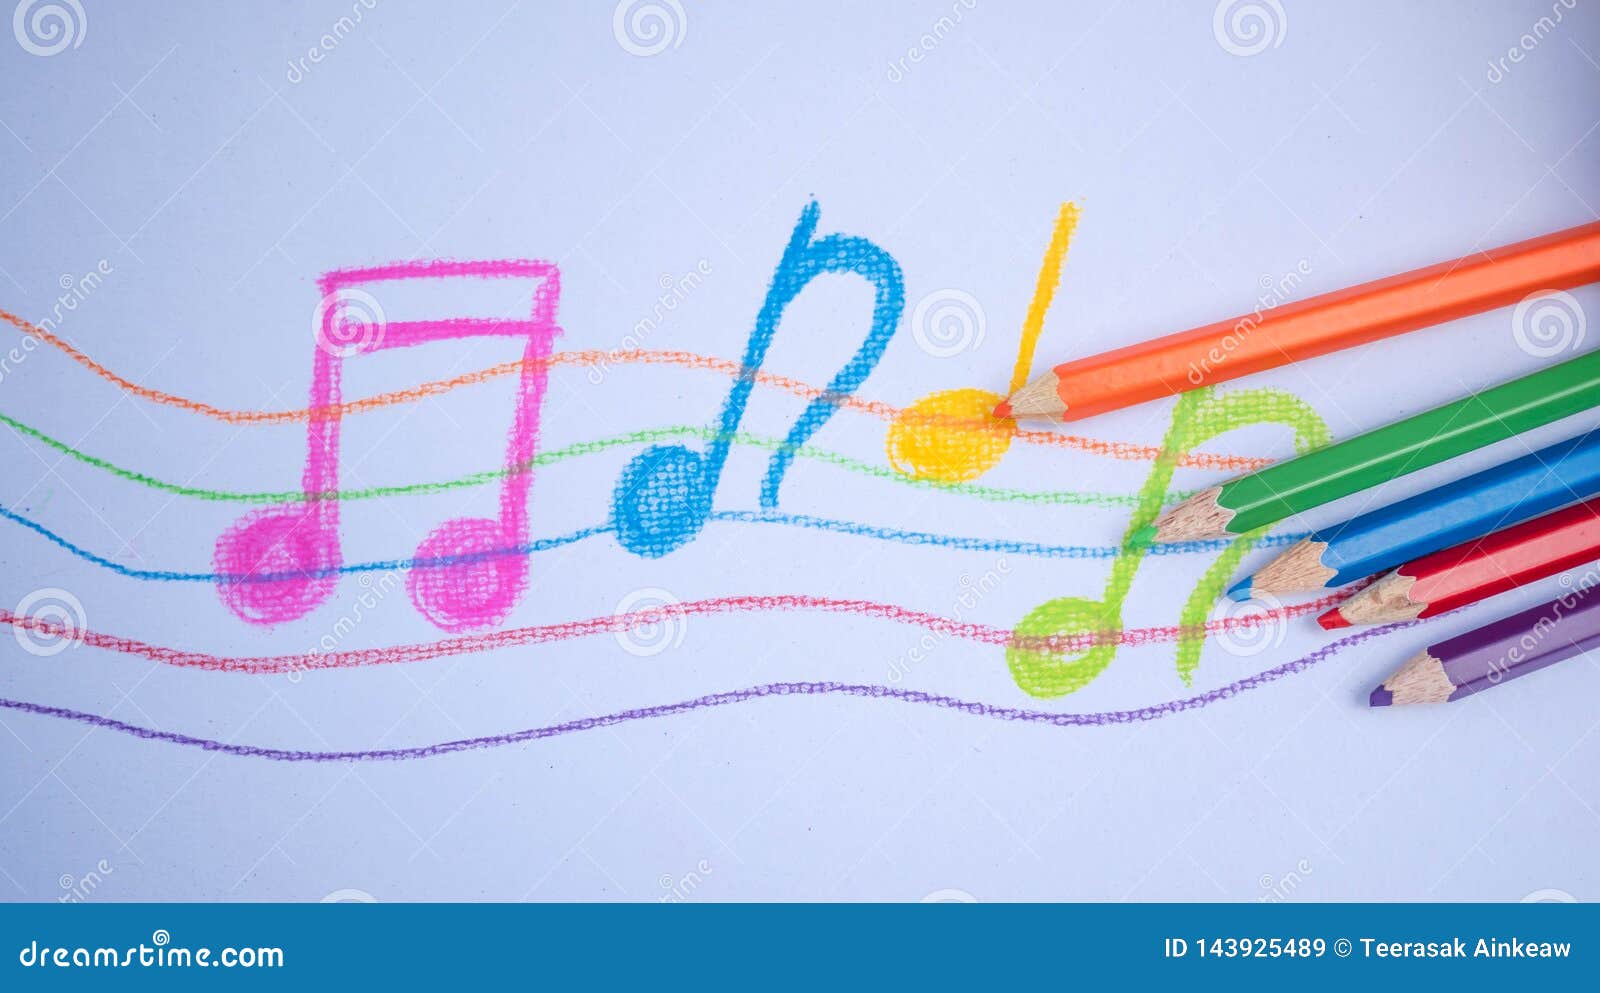 Color Pencils Place on White Paper Background with Music Note Drawing.  Education Concept Stock Image - Image of abstract, desk: 143925489